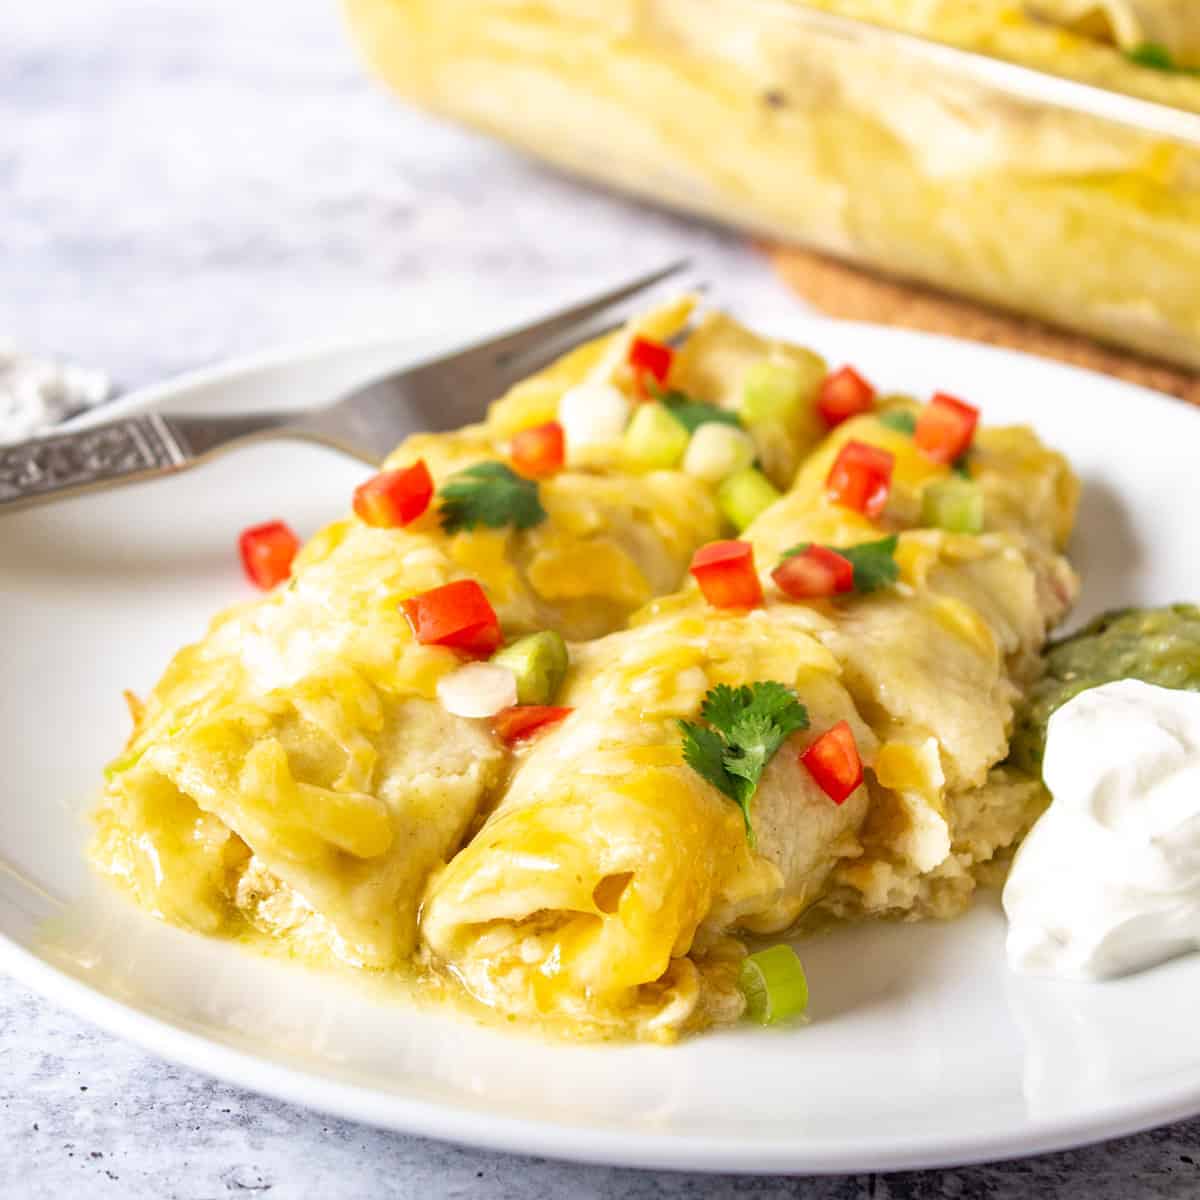 Two enchiladas with green sauce on a plate.